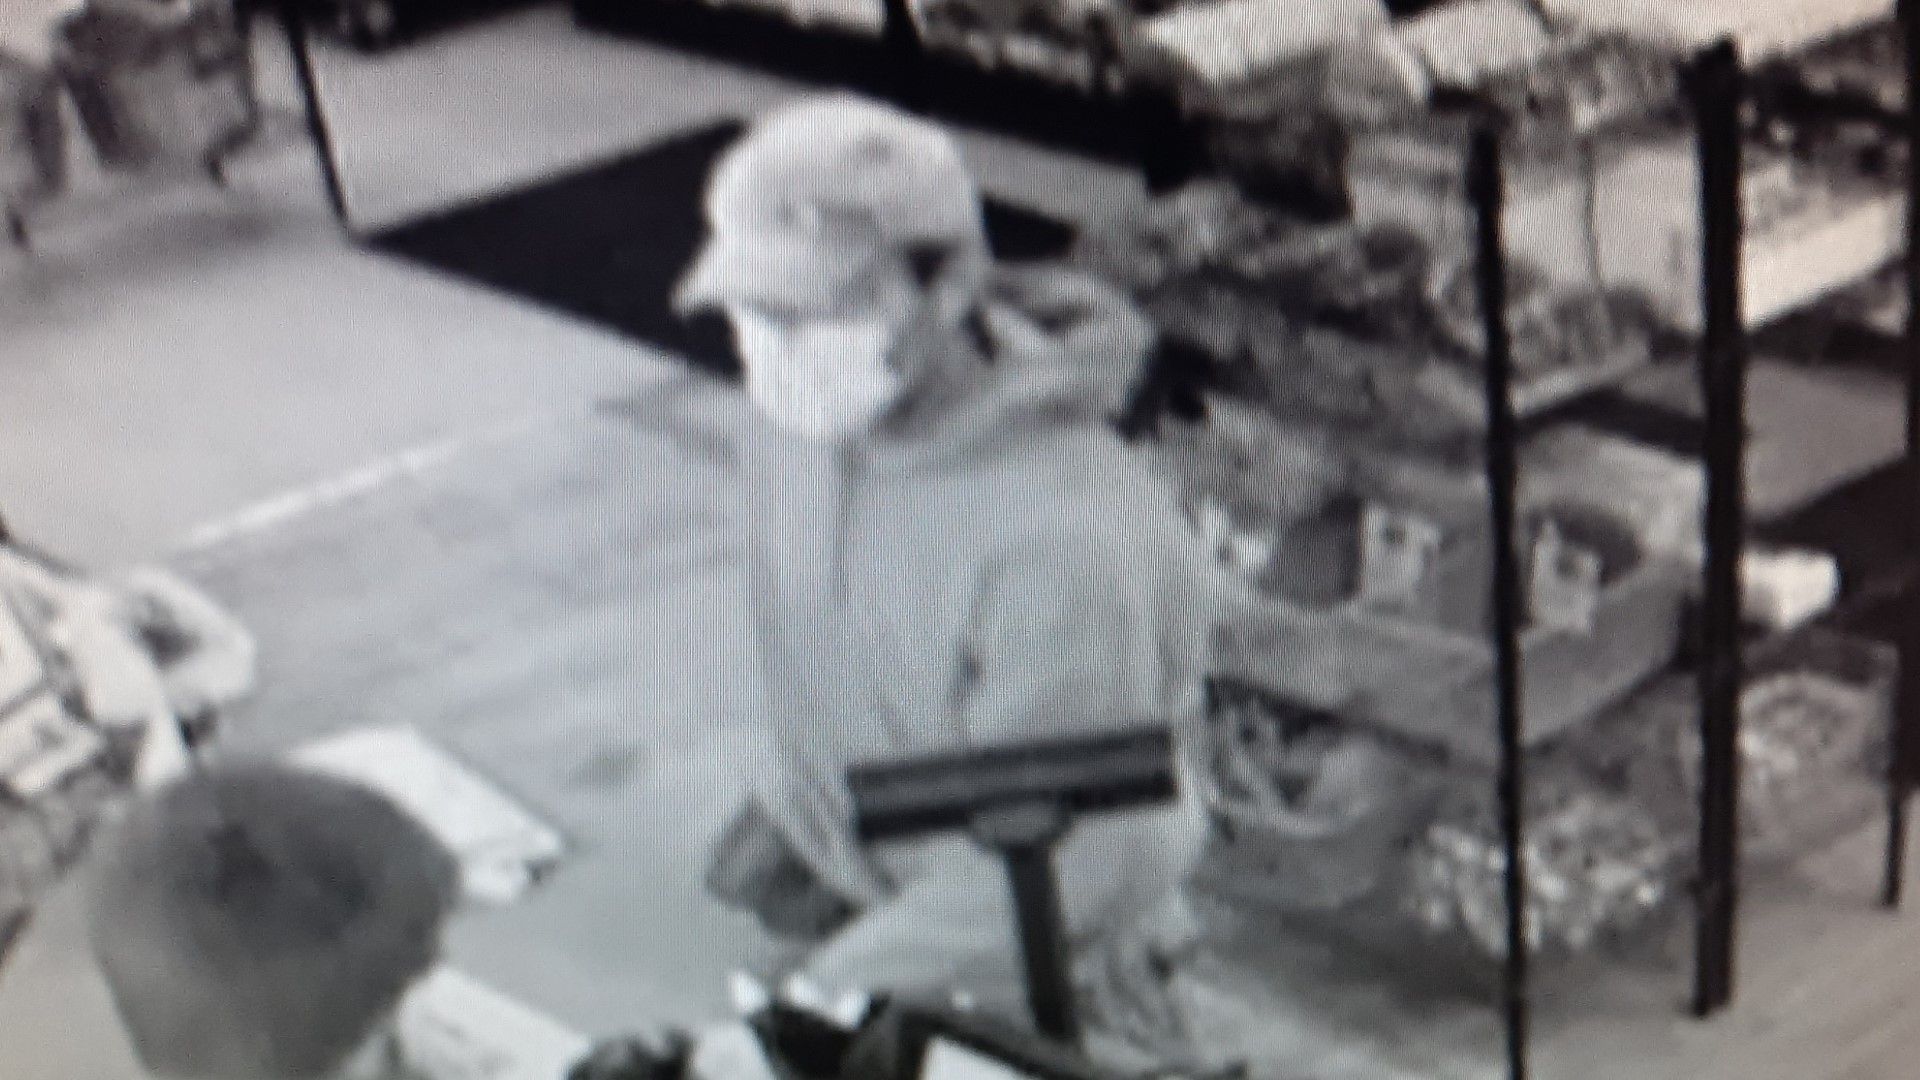 Mecosta County Sheriff's Office is asking for the public's help in identifying a suspect in an armed robbery that happened Thursday.